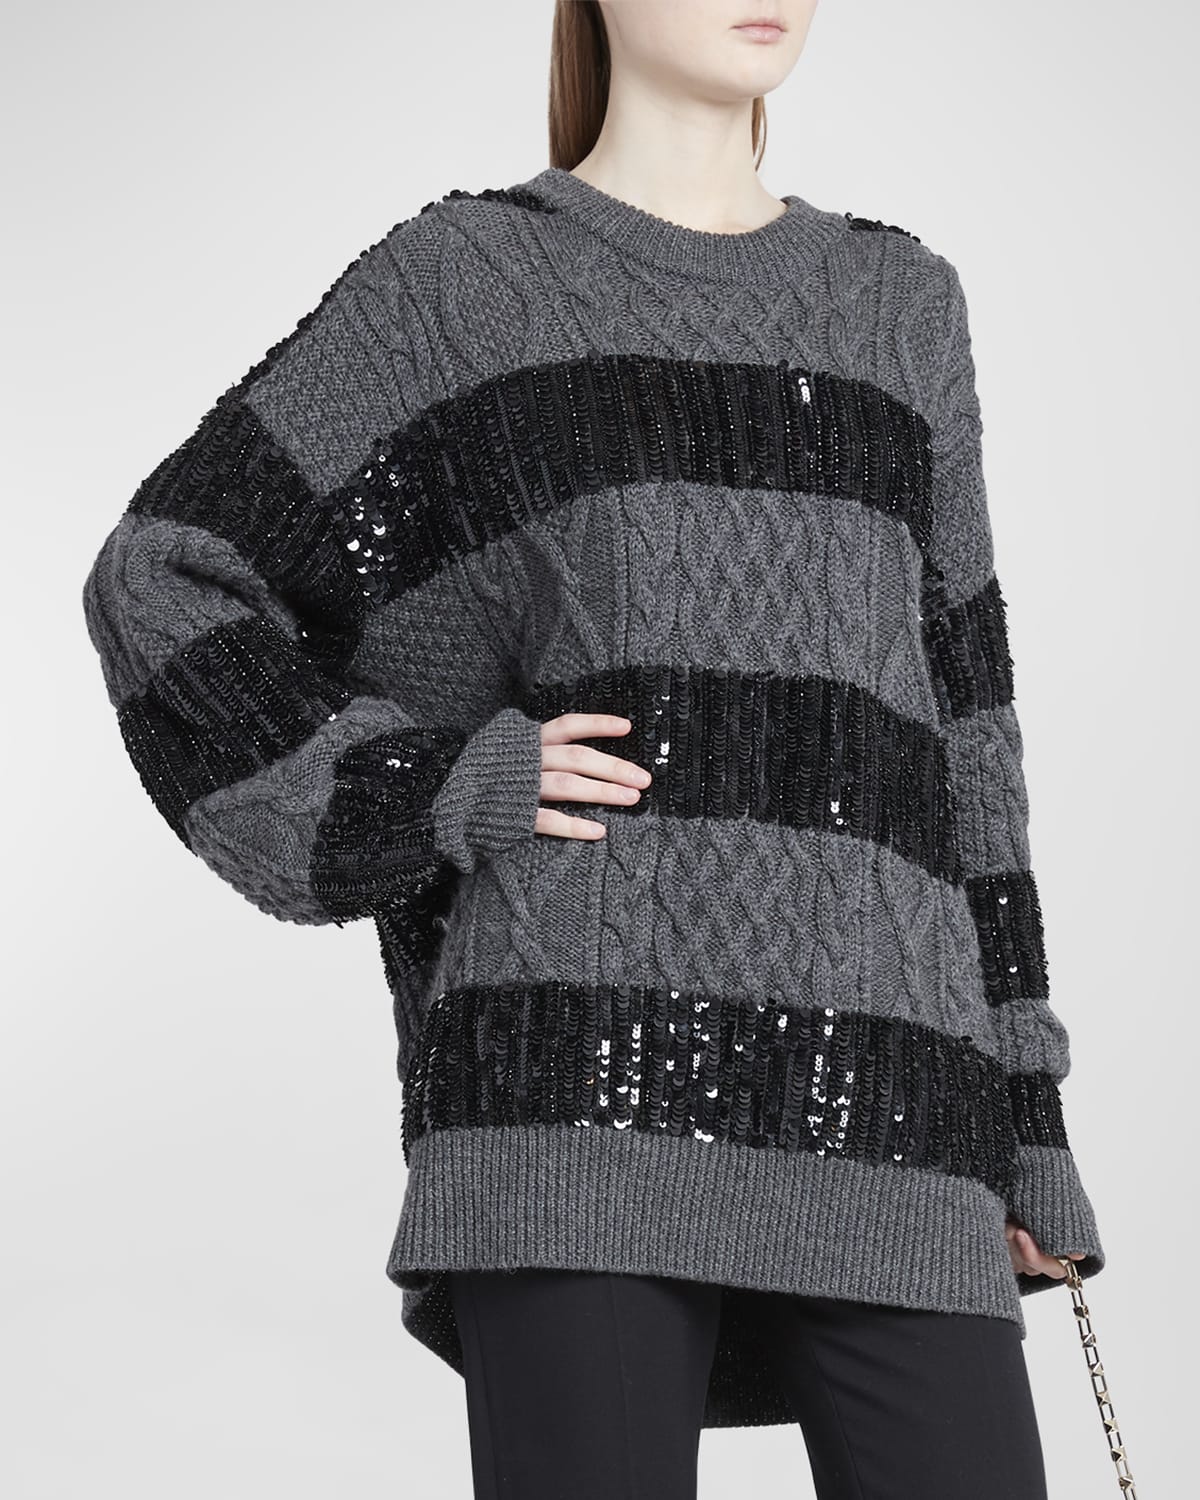 VALENTINO OVERSIZE CABLE-KNIT SWEATER WITH EMBELLISHED STRIPES